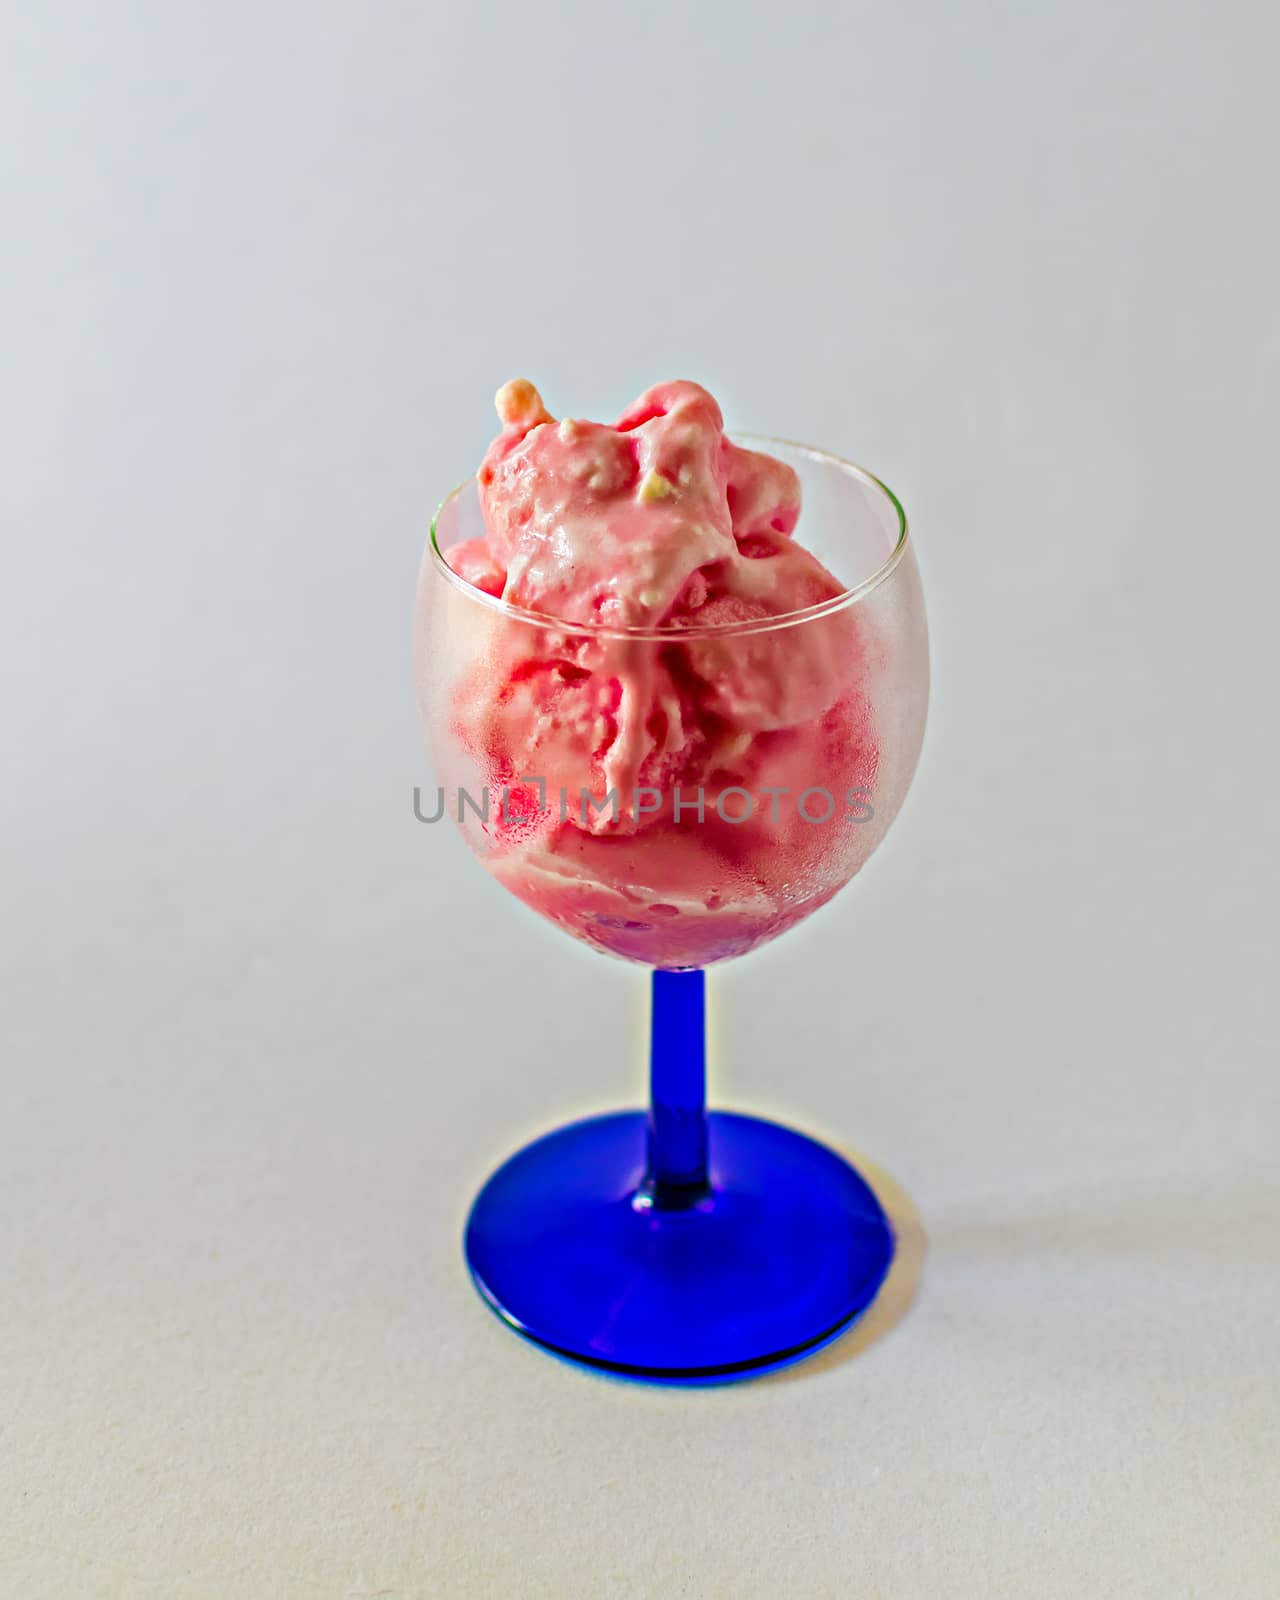 Isolated image of delicious pink strawberry ice-cream in a transparent wine glass on a clear white background.